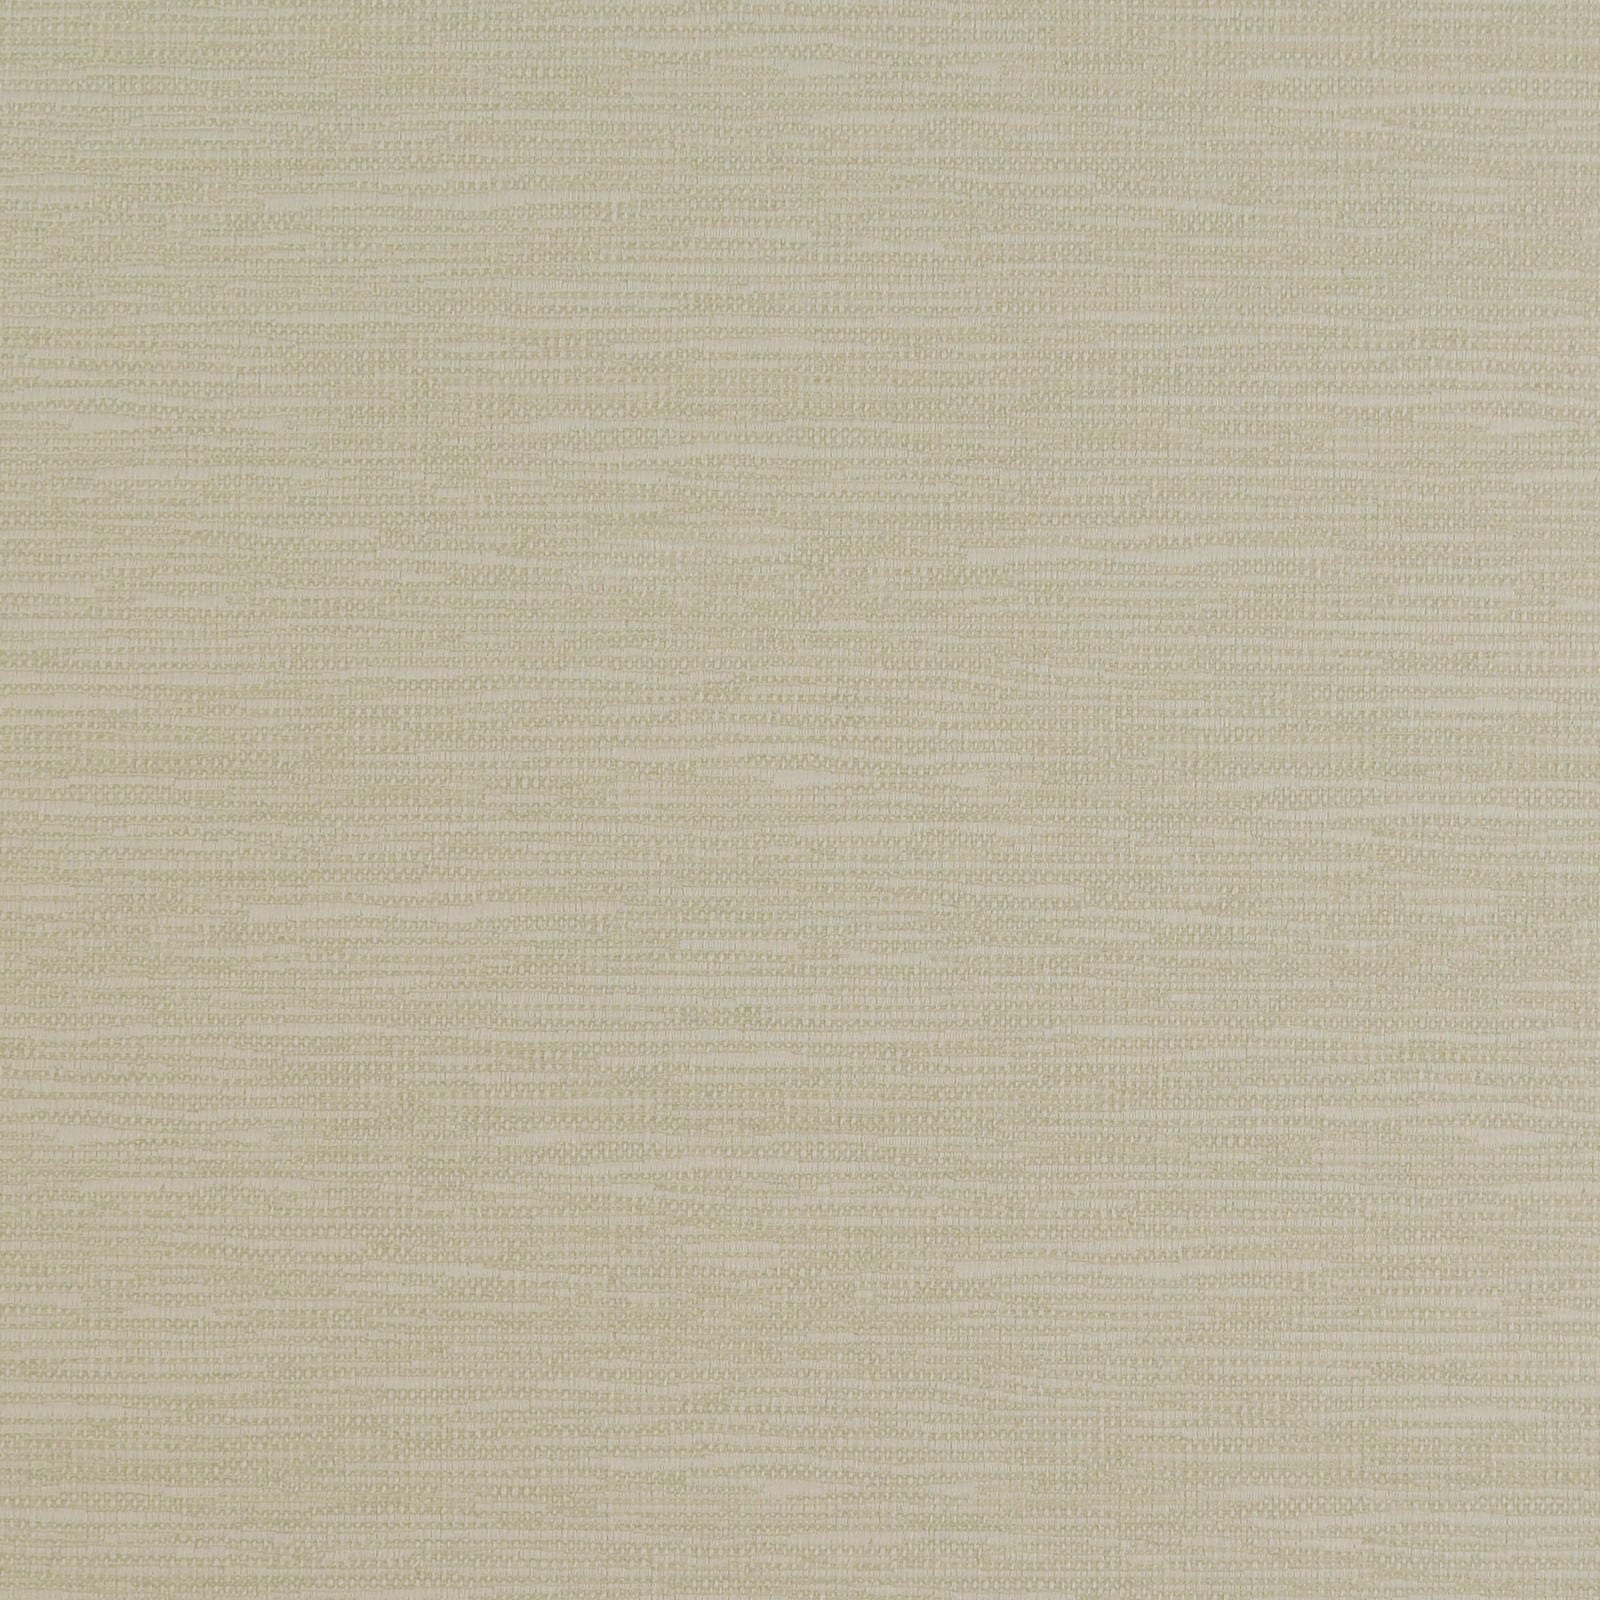 Essential Living Razz Beige Polyester Blend Fabric